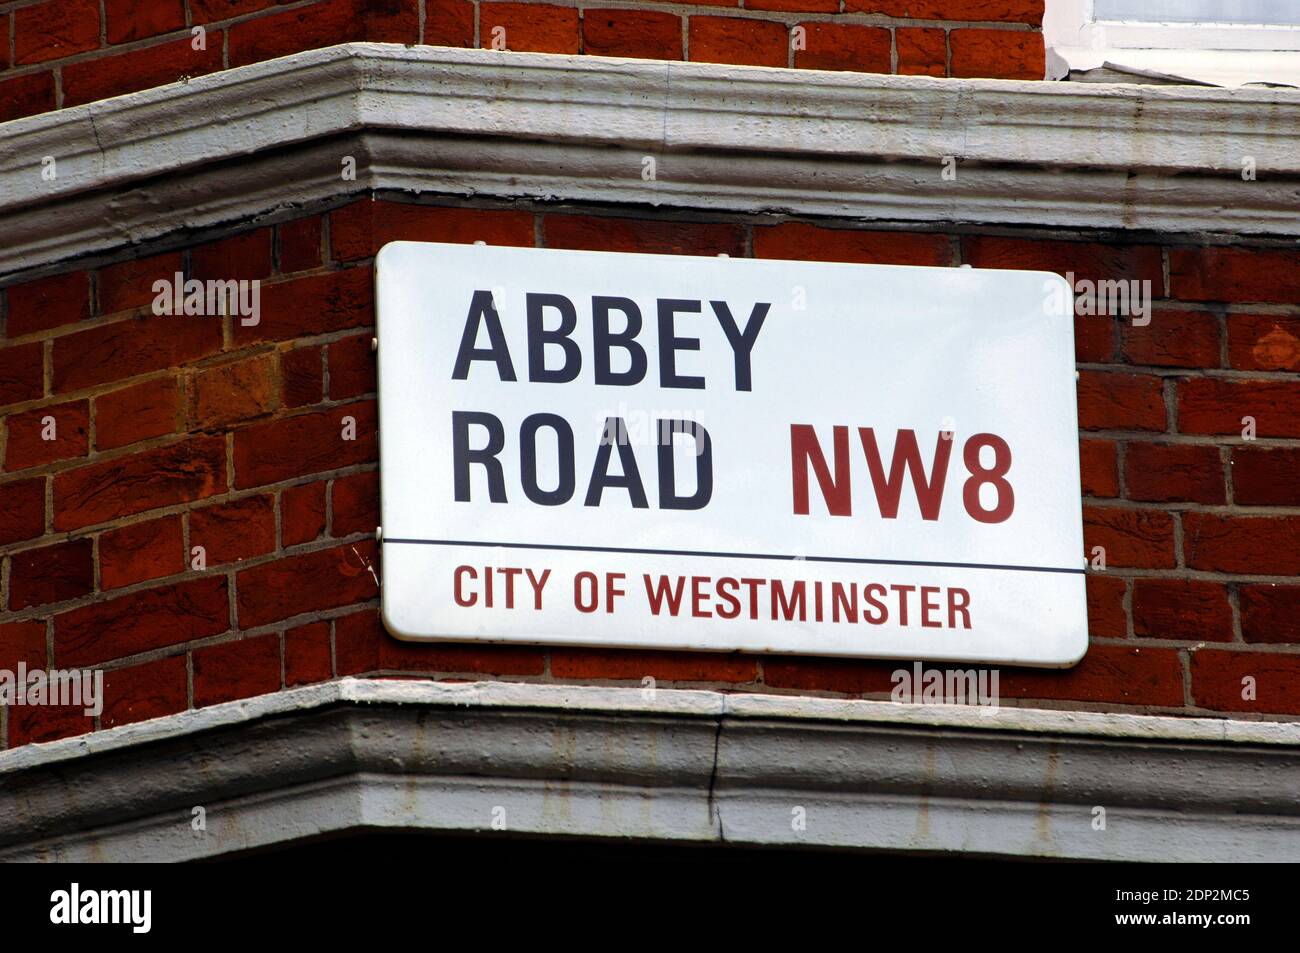 United Kingdom, England, London. Abbey Road street sign. City of Westminister. Famous for the Abbey Road Studios and for featuring on the cover of the Beatles album in 1969, called 'Abbey Road'. Stock Photo